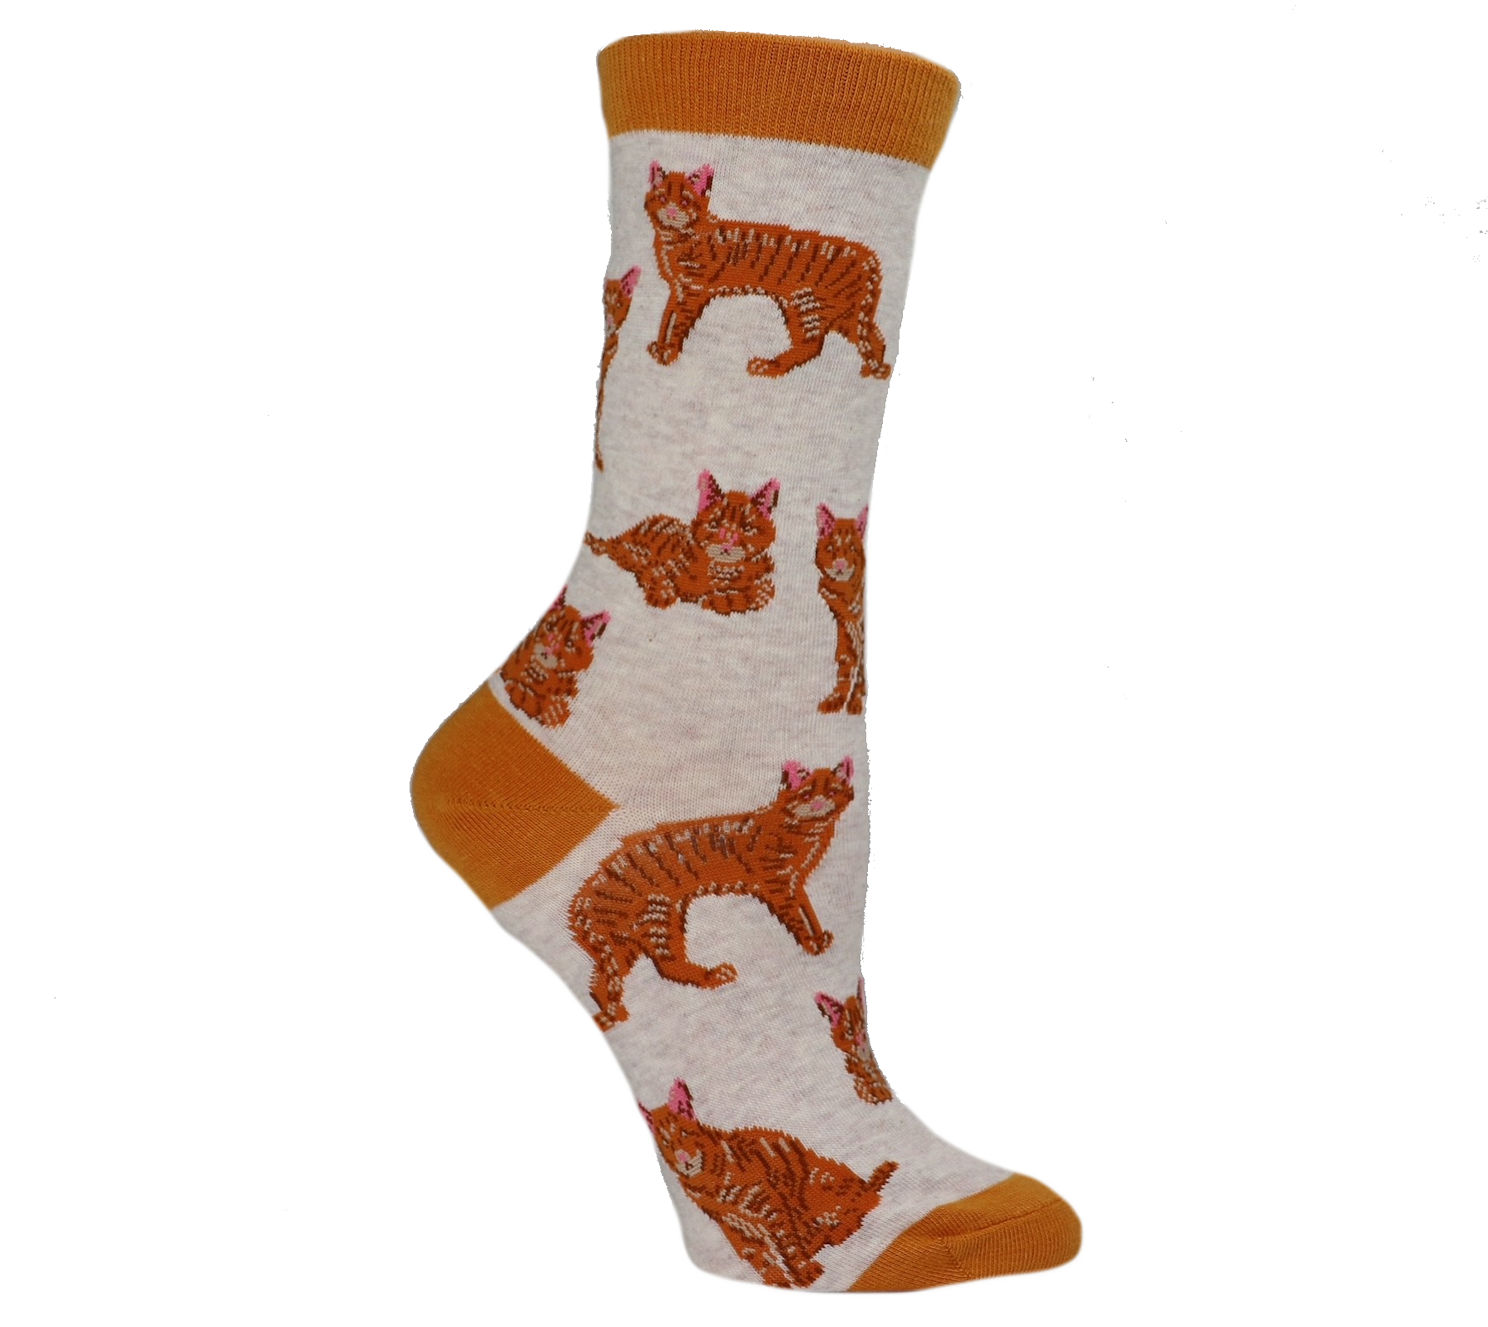 Ginger Tabby Cat Socks UK Size 3.5 to 6.5 - A Bentley Cushions